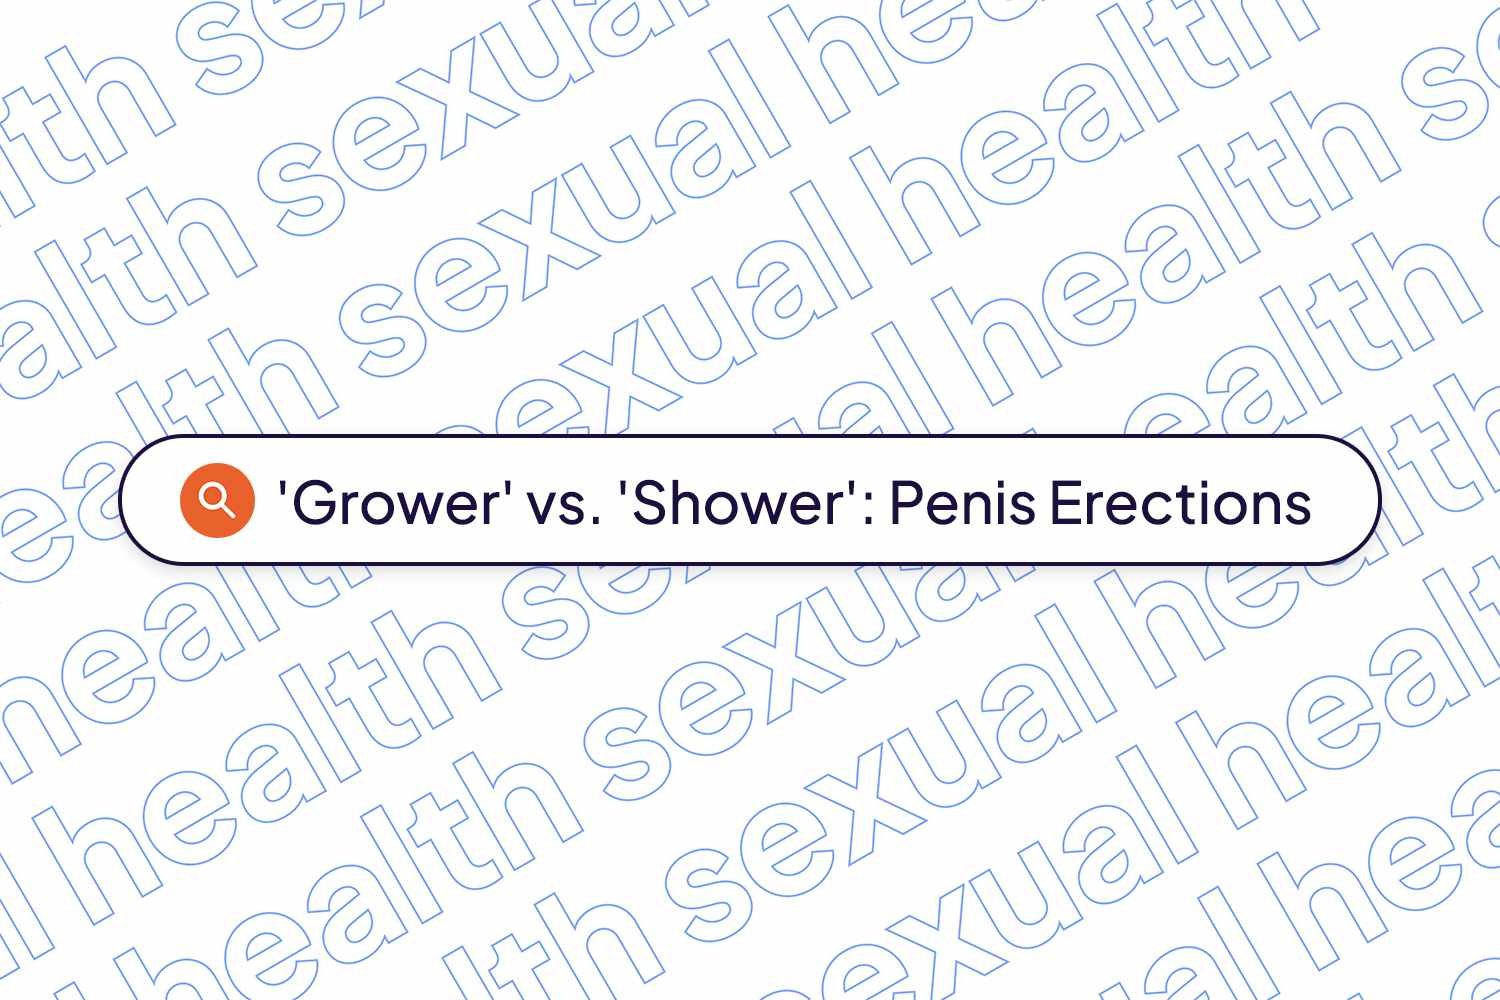 'Grower' vs. 'Shower': Study Identifies Differences in Penis Erections